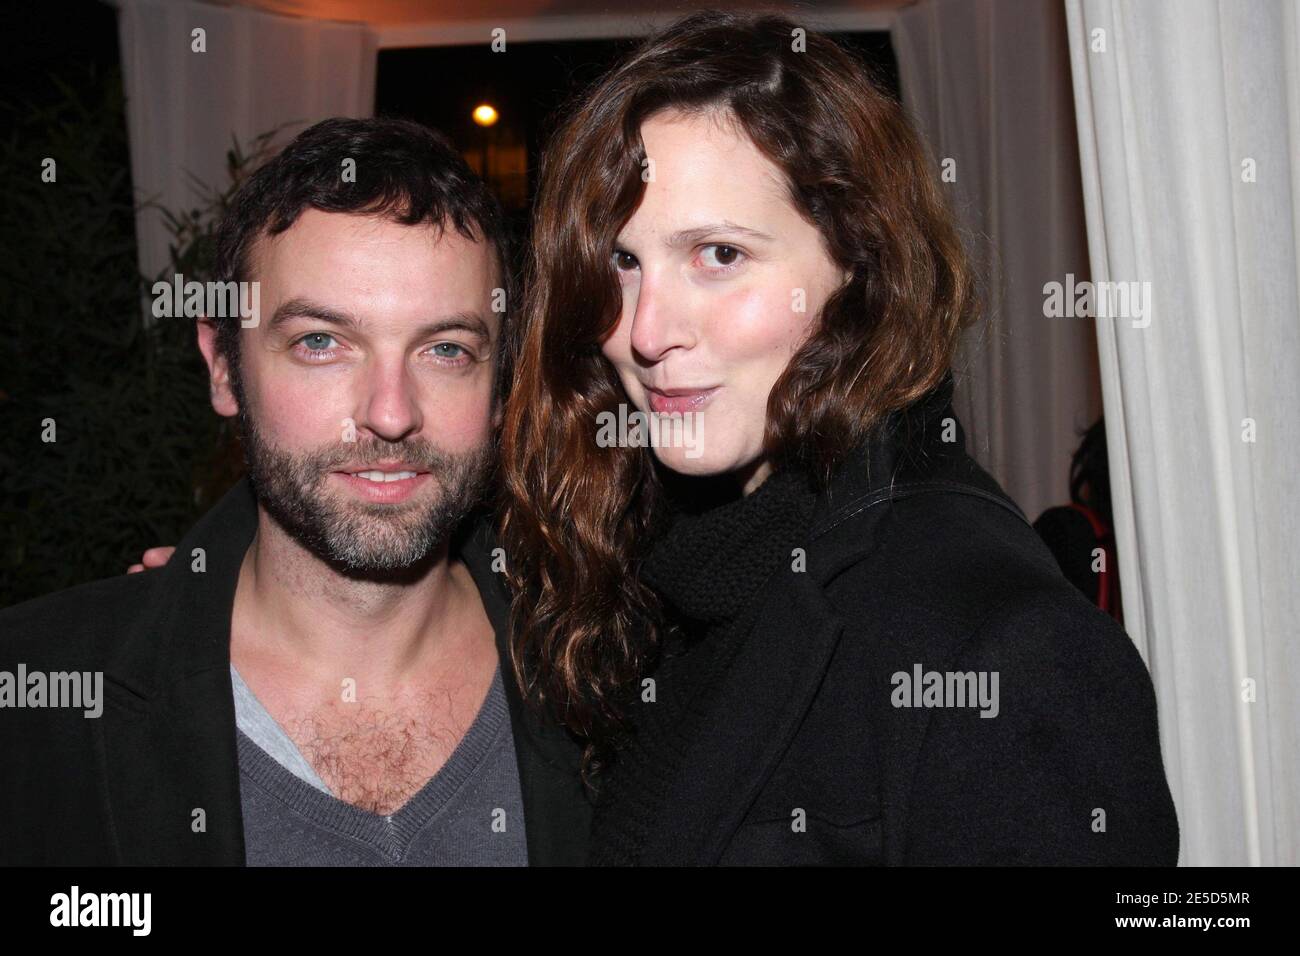 French writer Justine Levy (Bernard Henri Levy daughter's) with her  boyfriend Patrick Mille attend the Flore literary prize 2008 organized by  Frederic Beigbeder at the 'Cafe de Flore' in Paris, France on